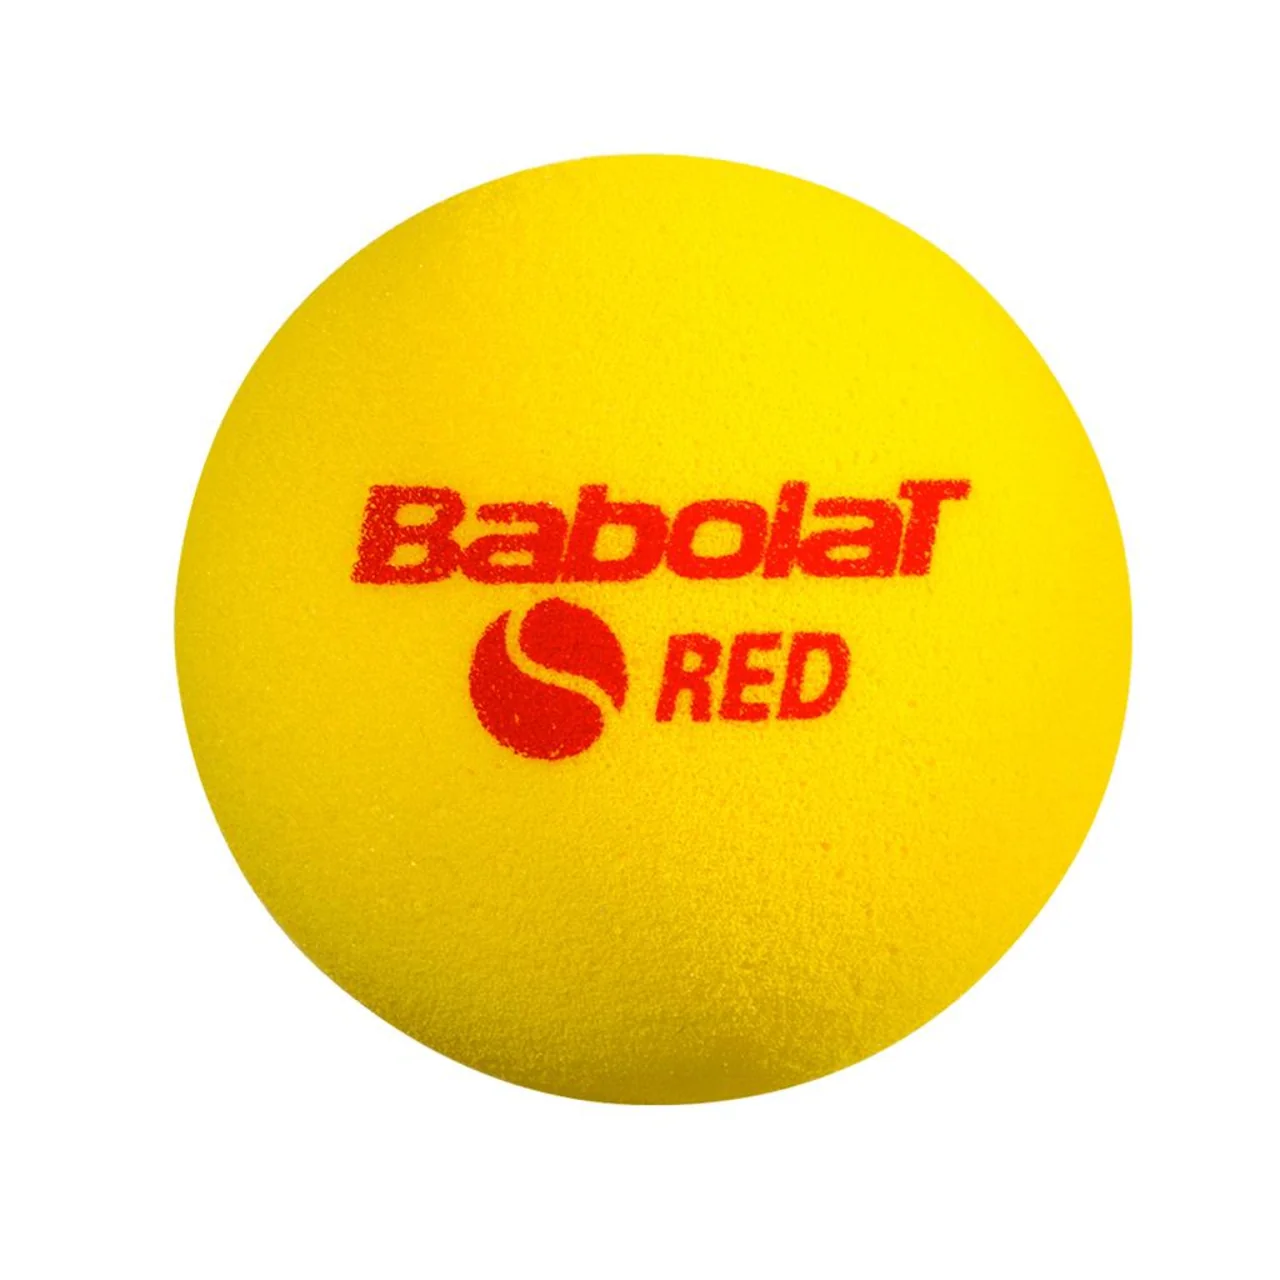 Babolat Red Foam 3-pack